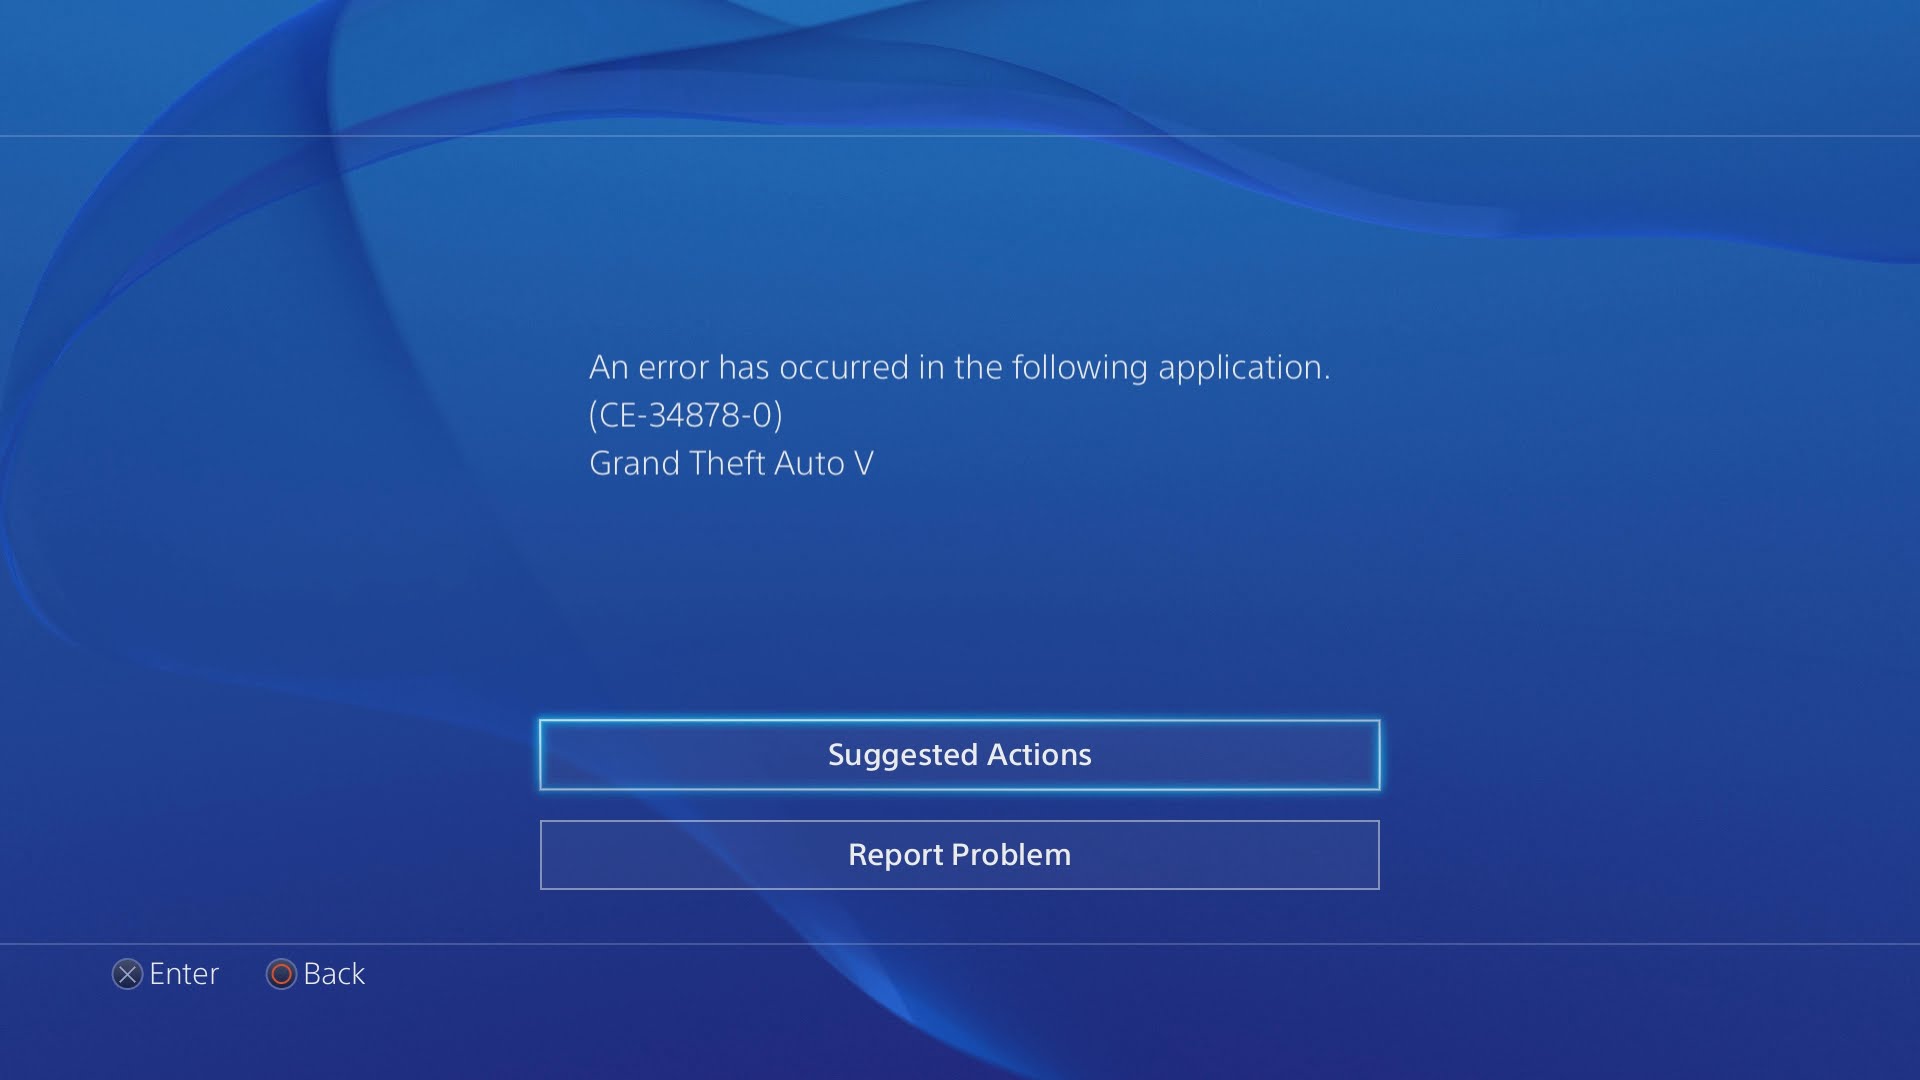 How to fix PS4 CE-34878-0 error?